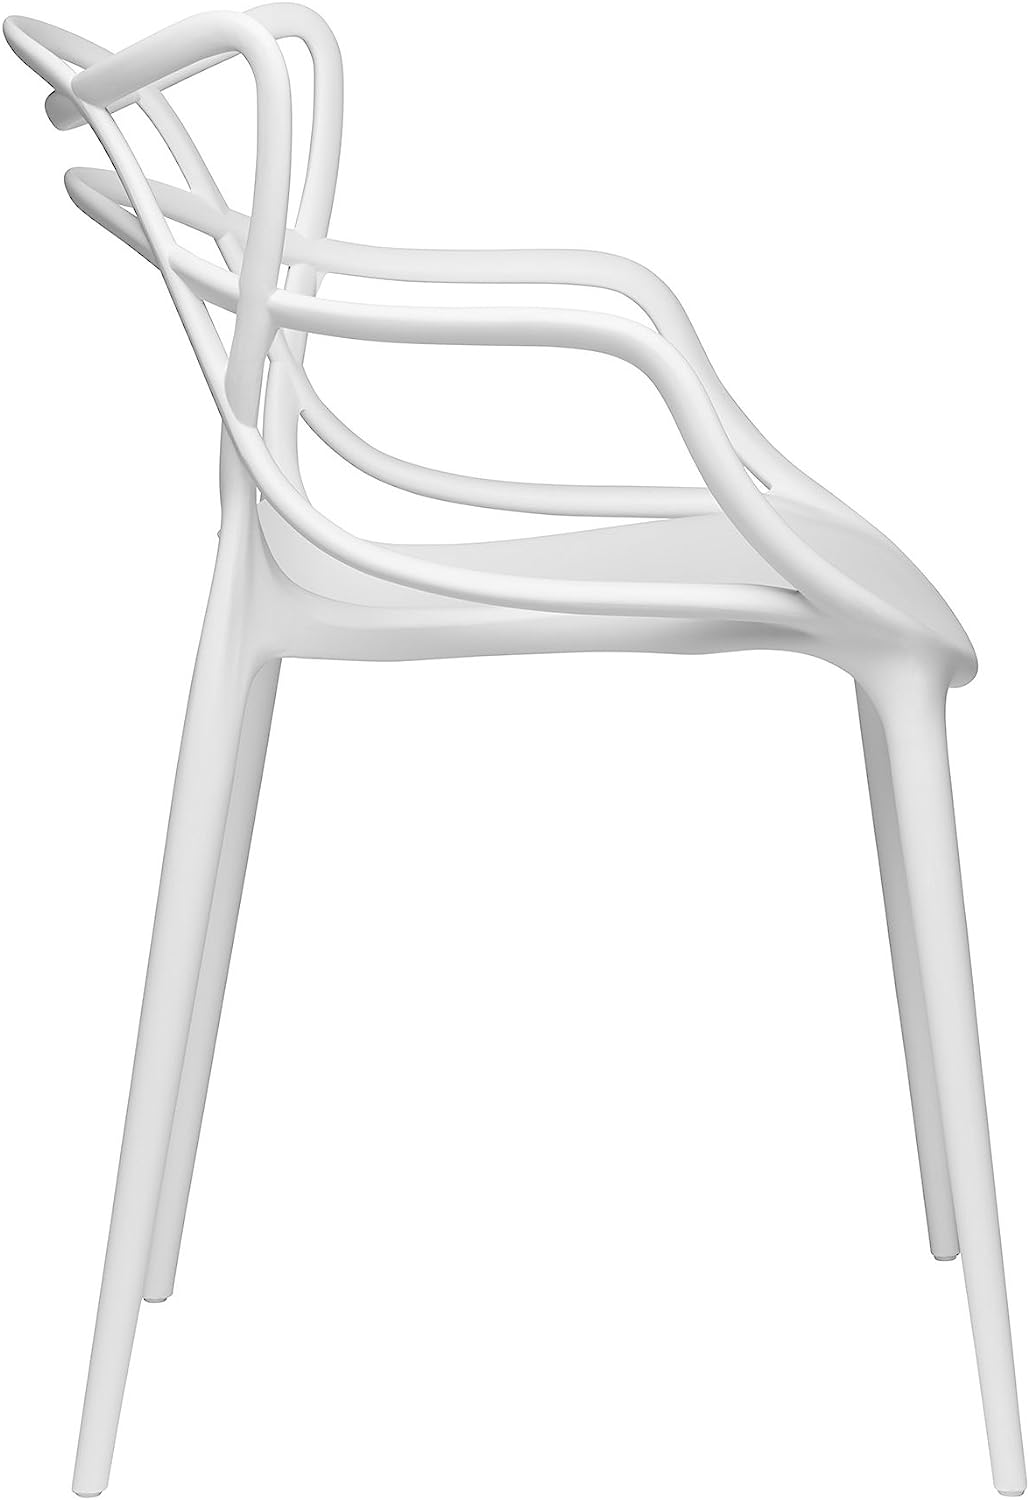 Masters Entangled Dining Chair Replica | HOG furniture.com.ng